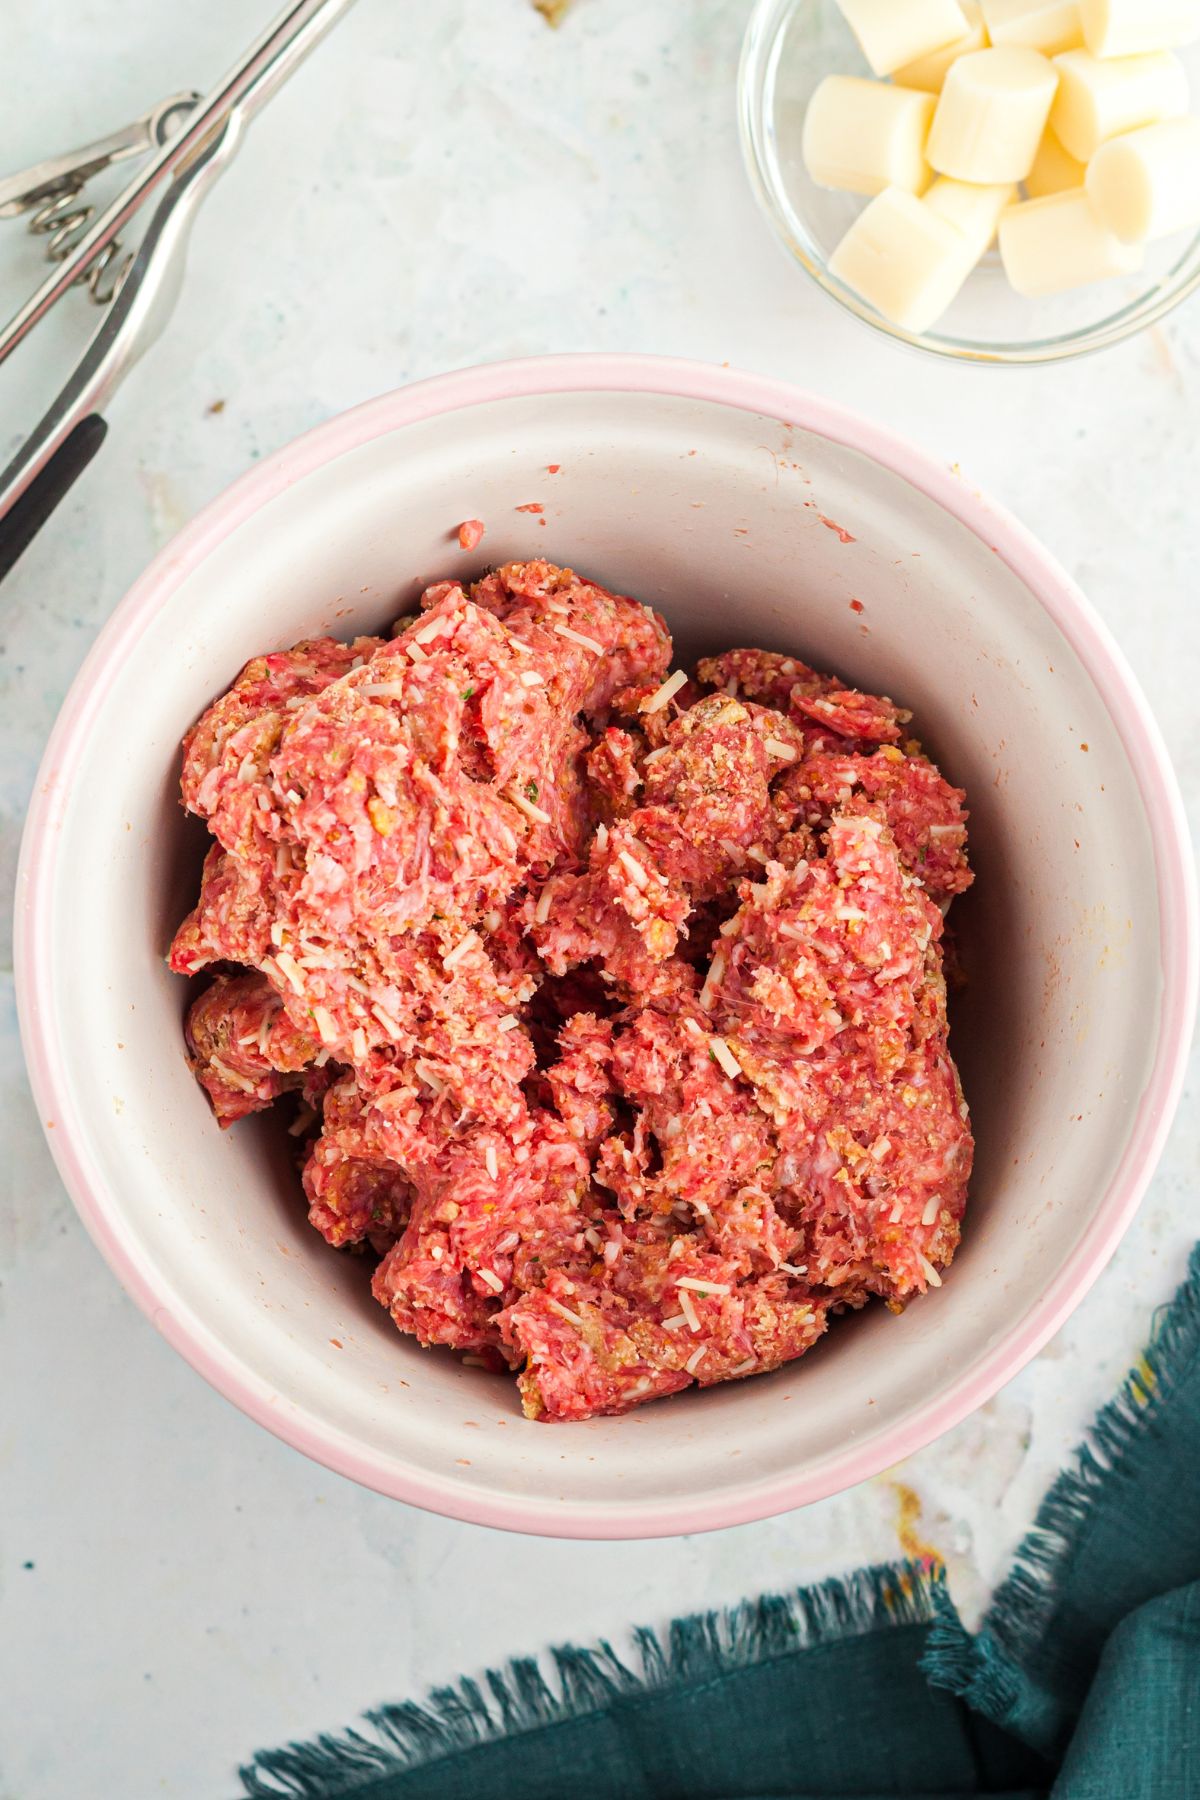 Ground beef combined with seasonings and breadcrumbs